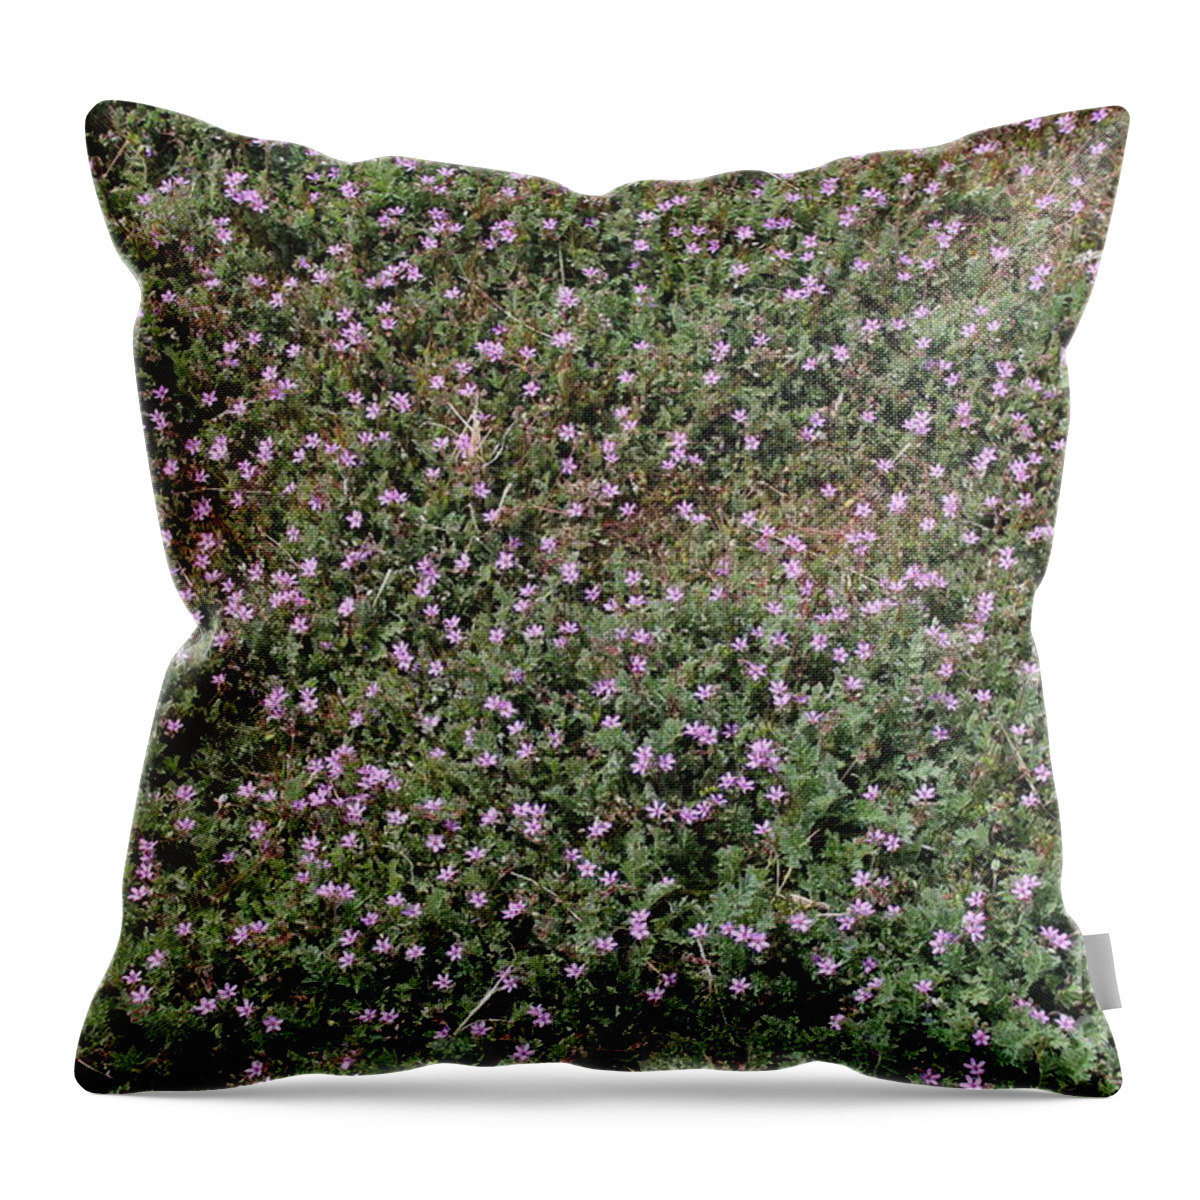 Purple Throw Pillow featuring the photograph Storksbill by Doug Miller